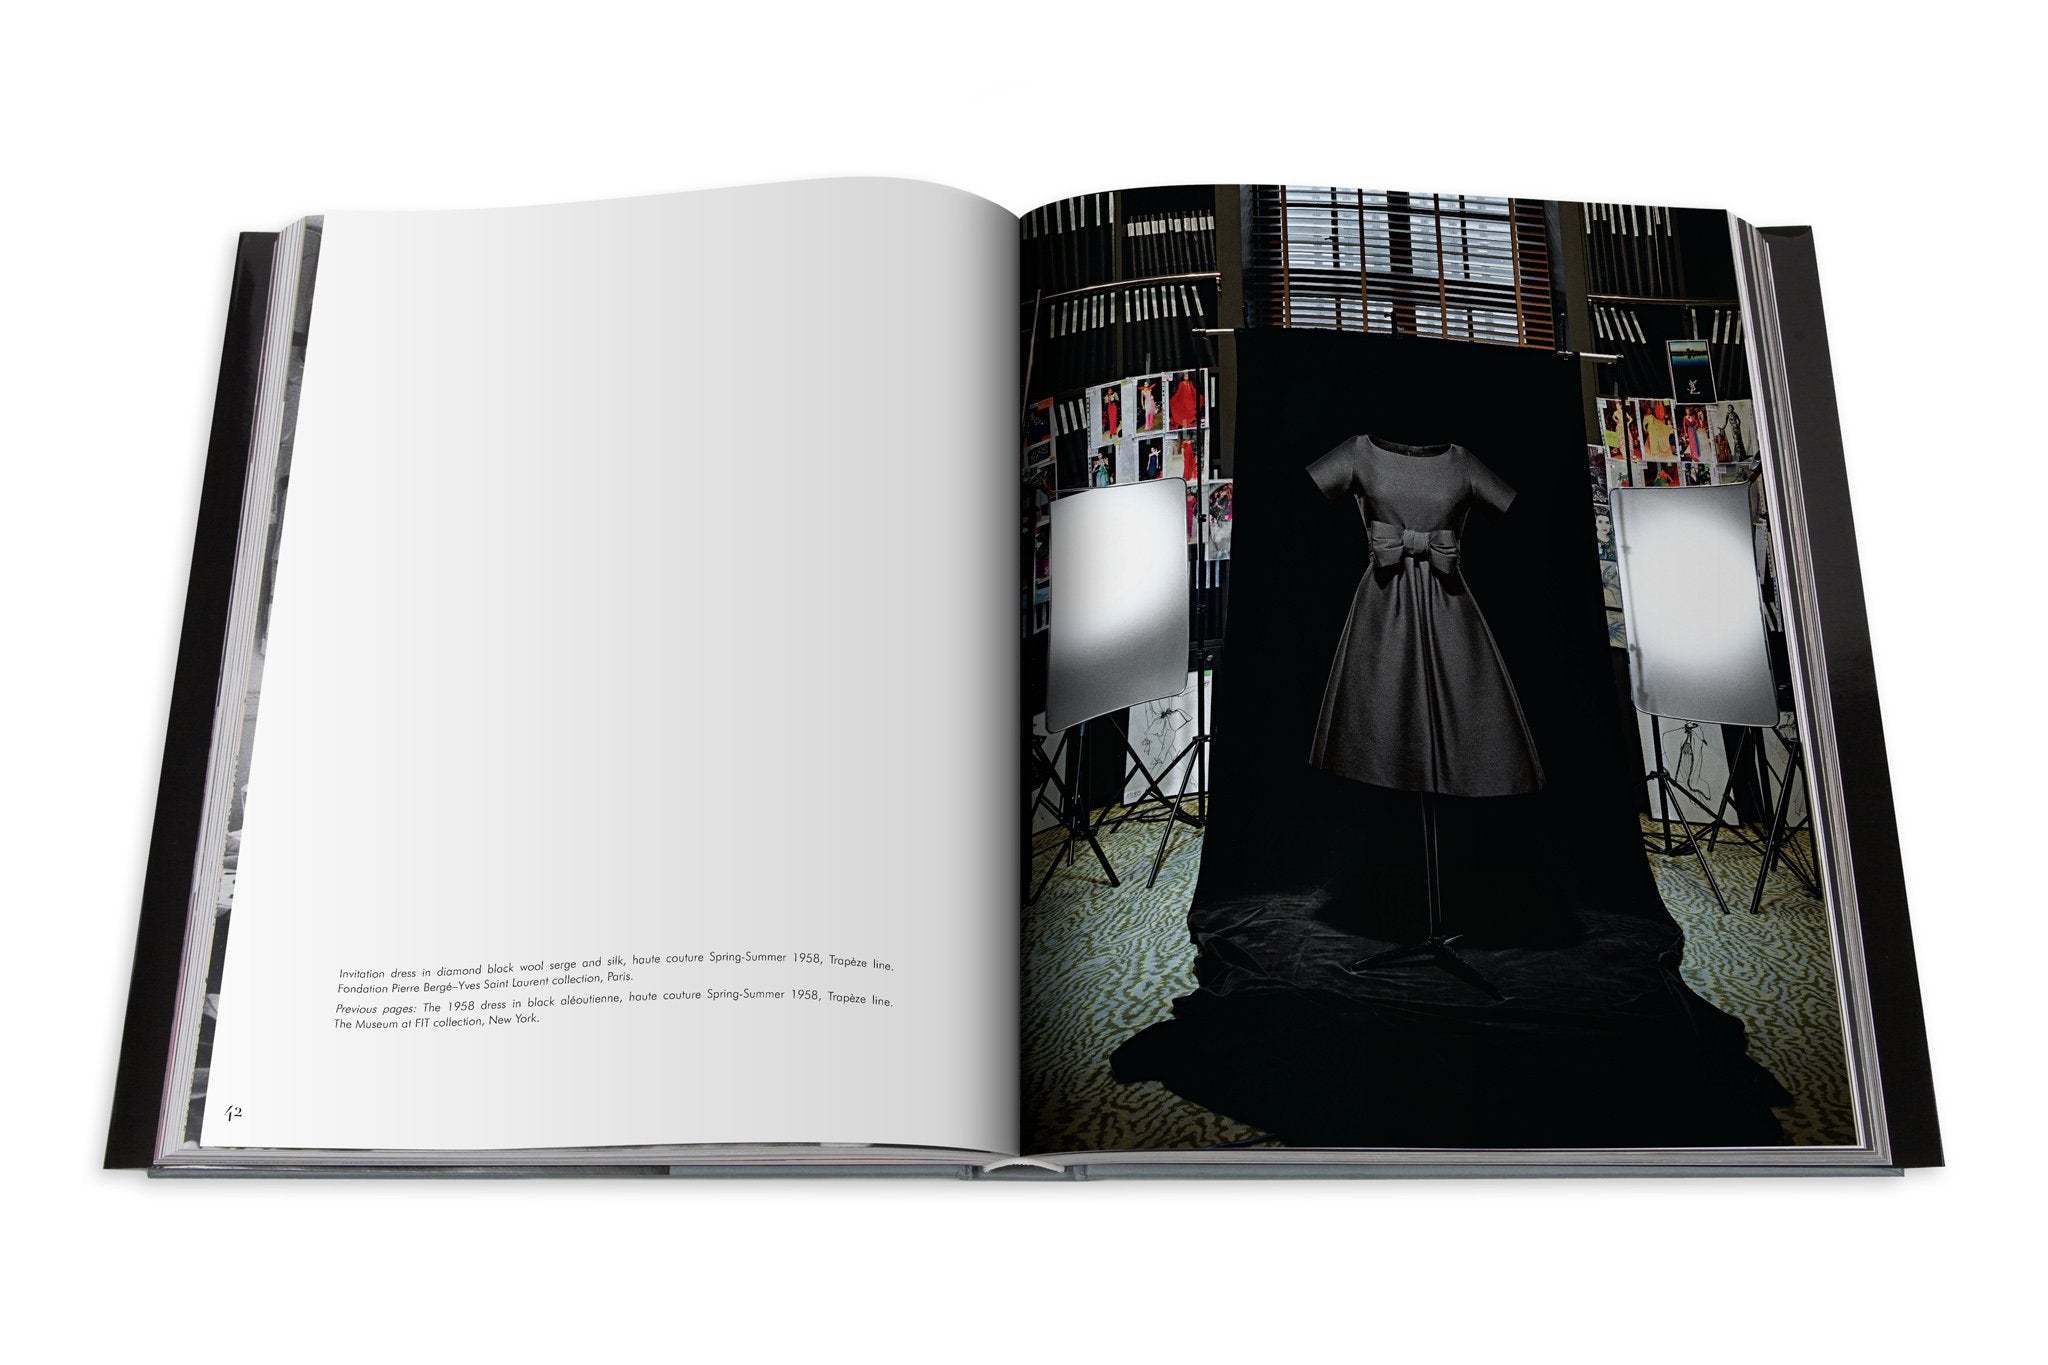 New Mags Dior Catwalk - Books 